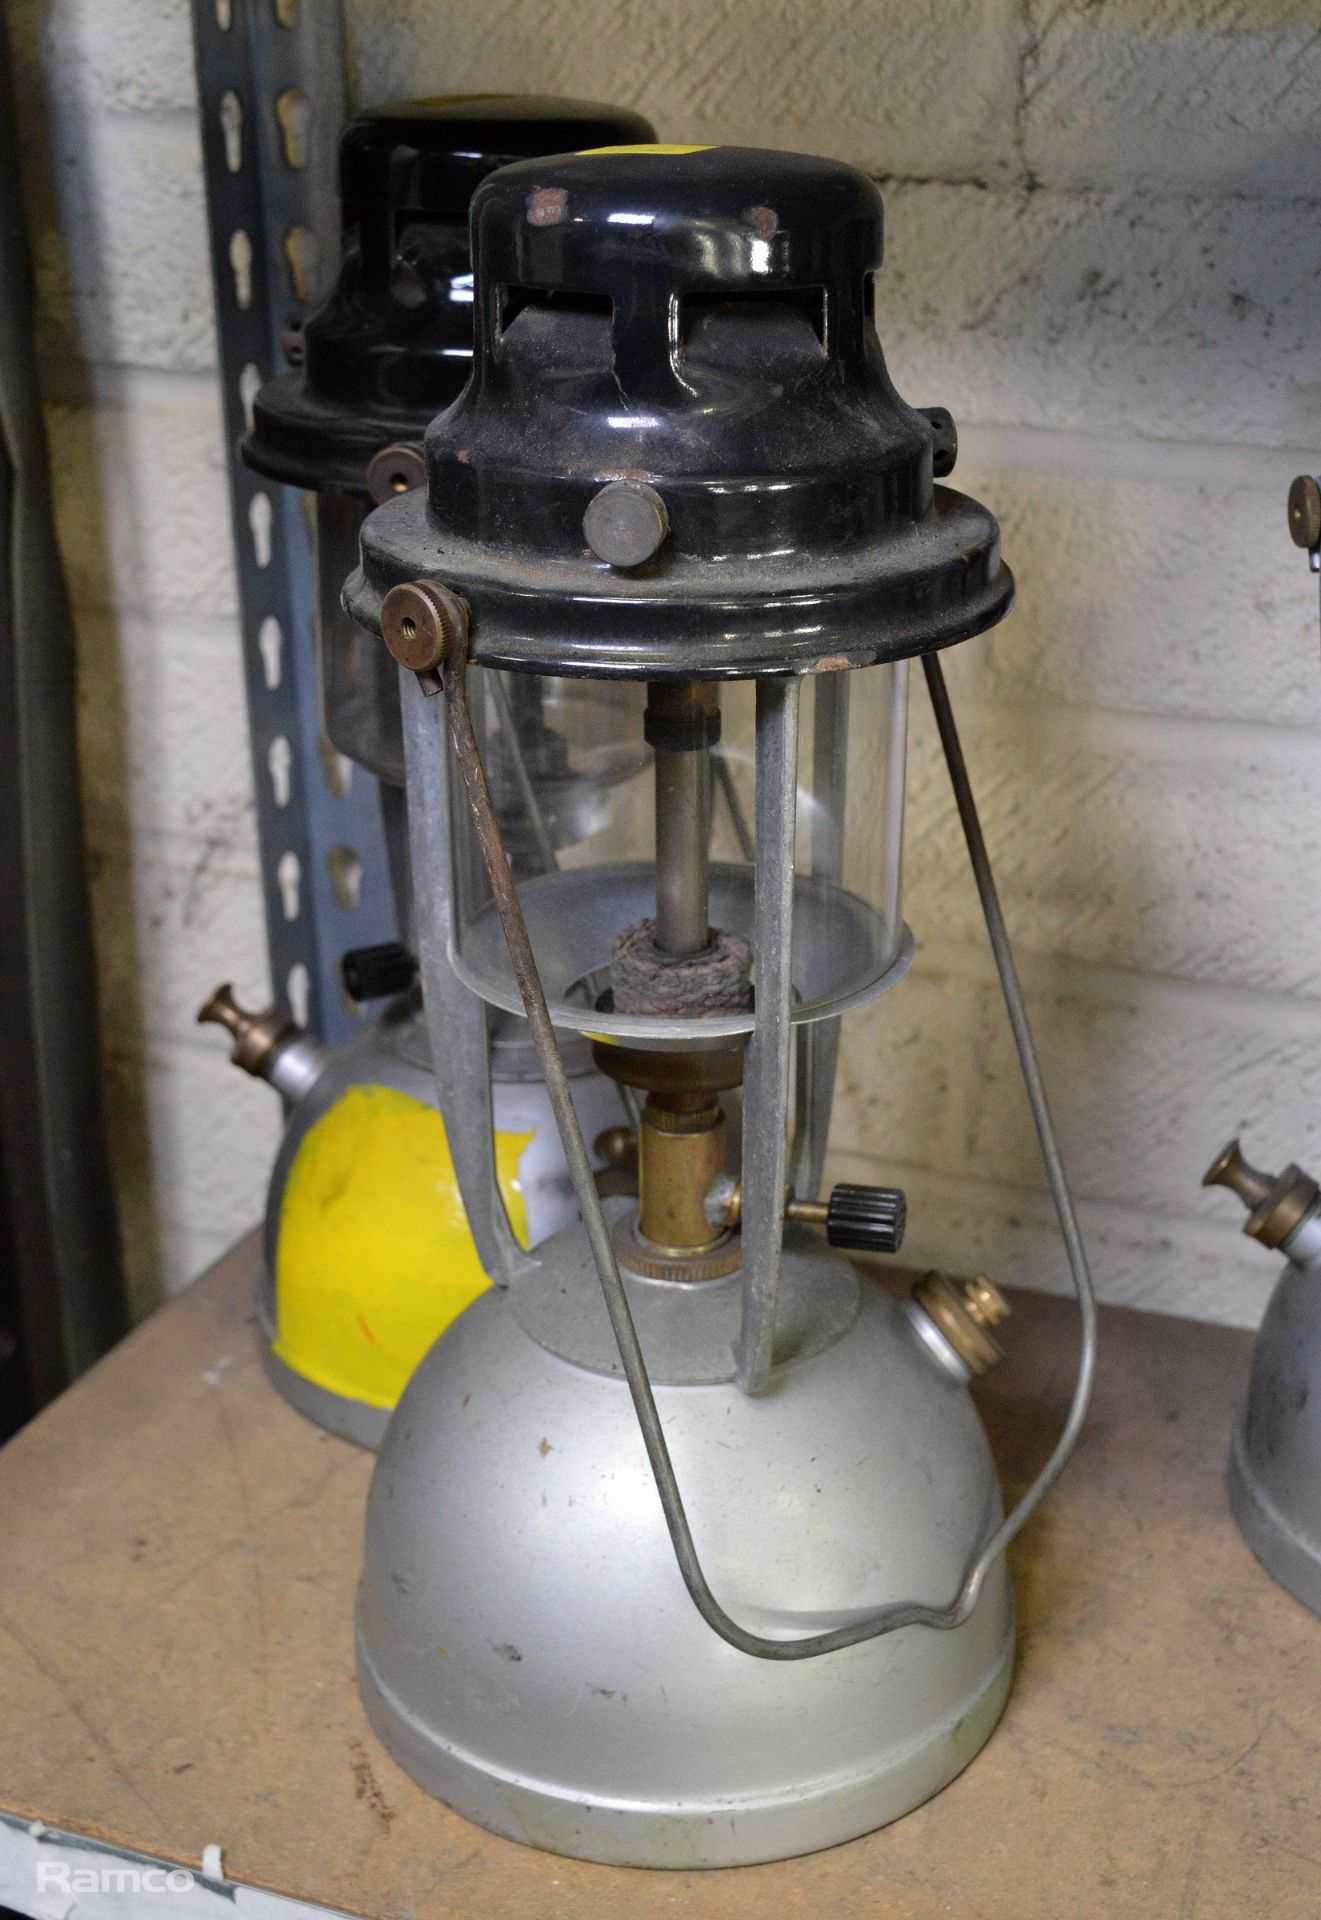 6x Tilley lamps - see pictures for condition - Image 3 of 3